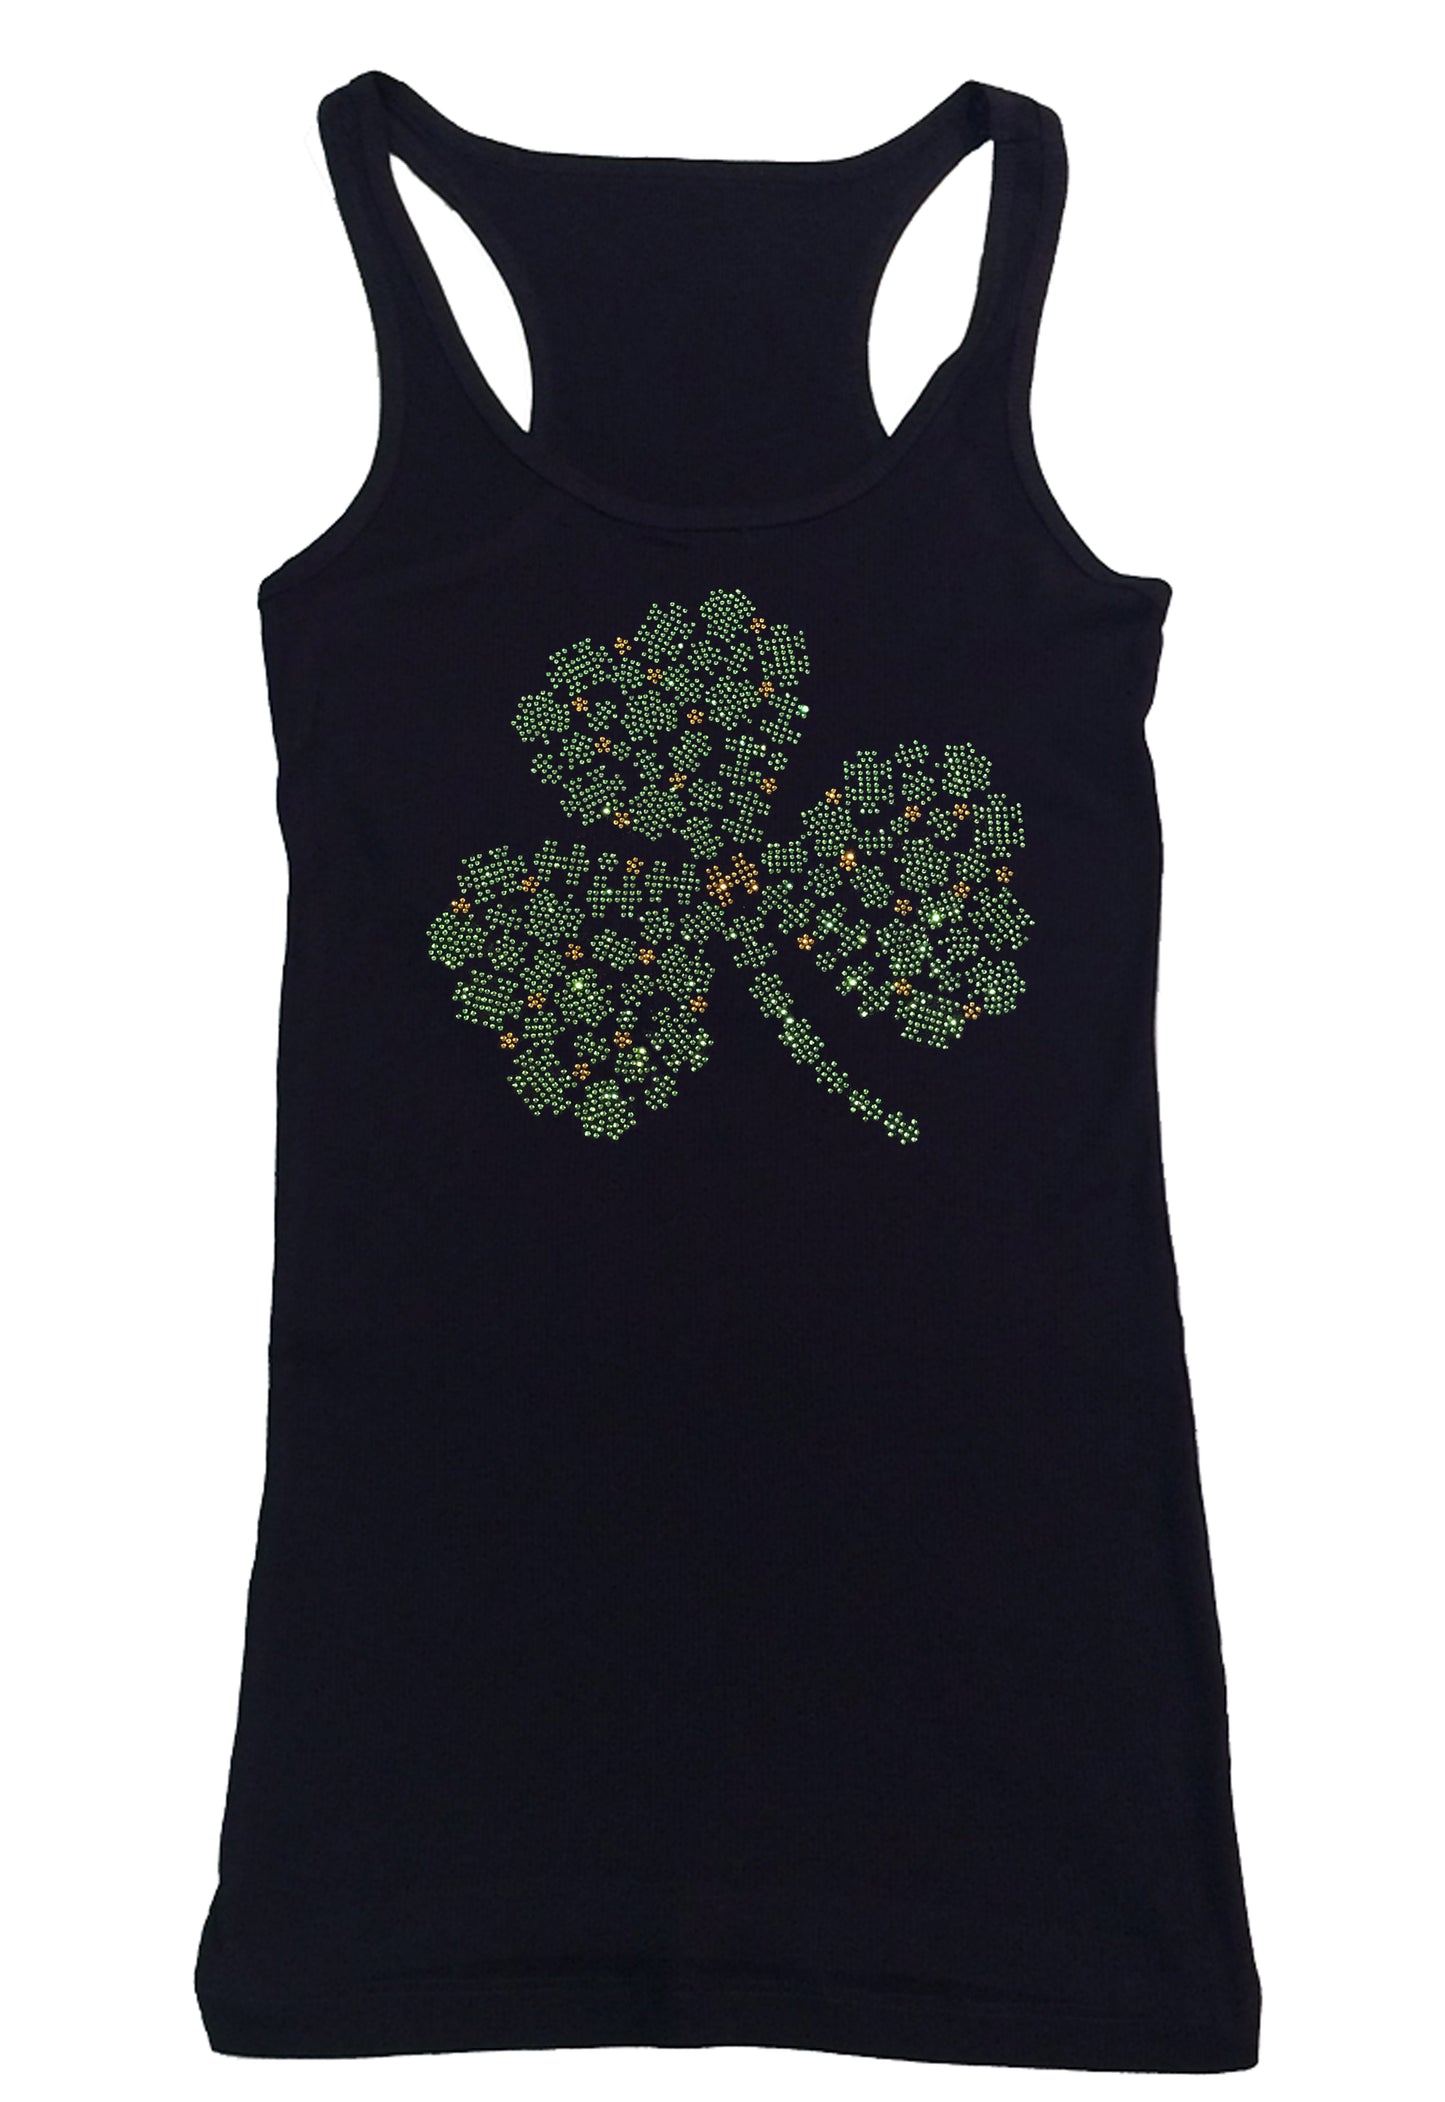 Womens T-shirt with St Patrick's Clover Collage in Rhinestones